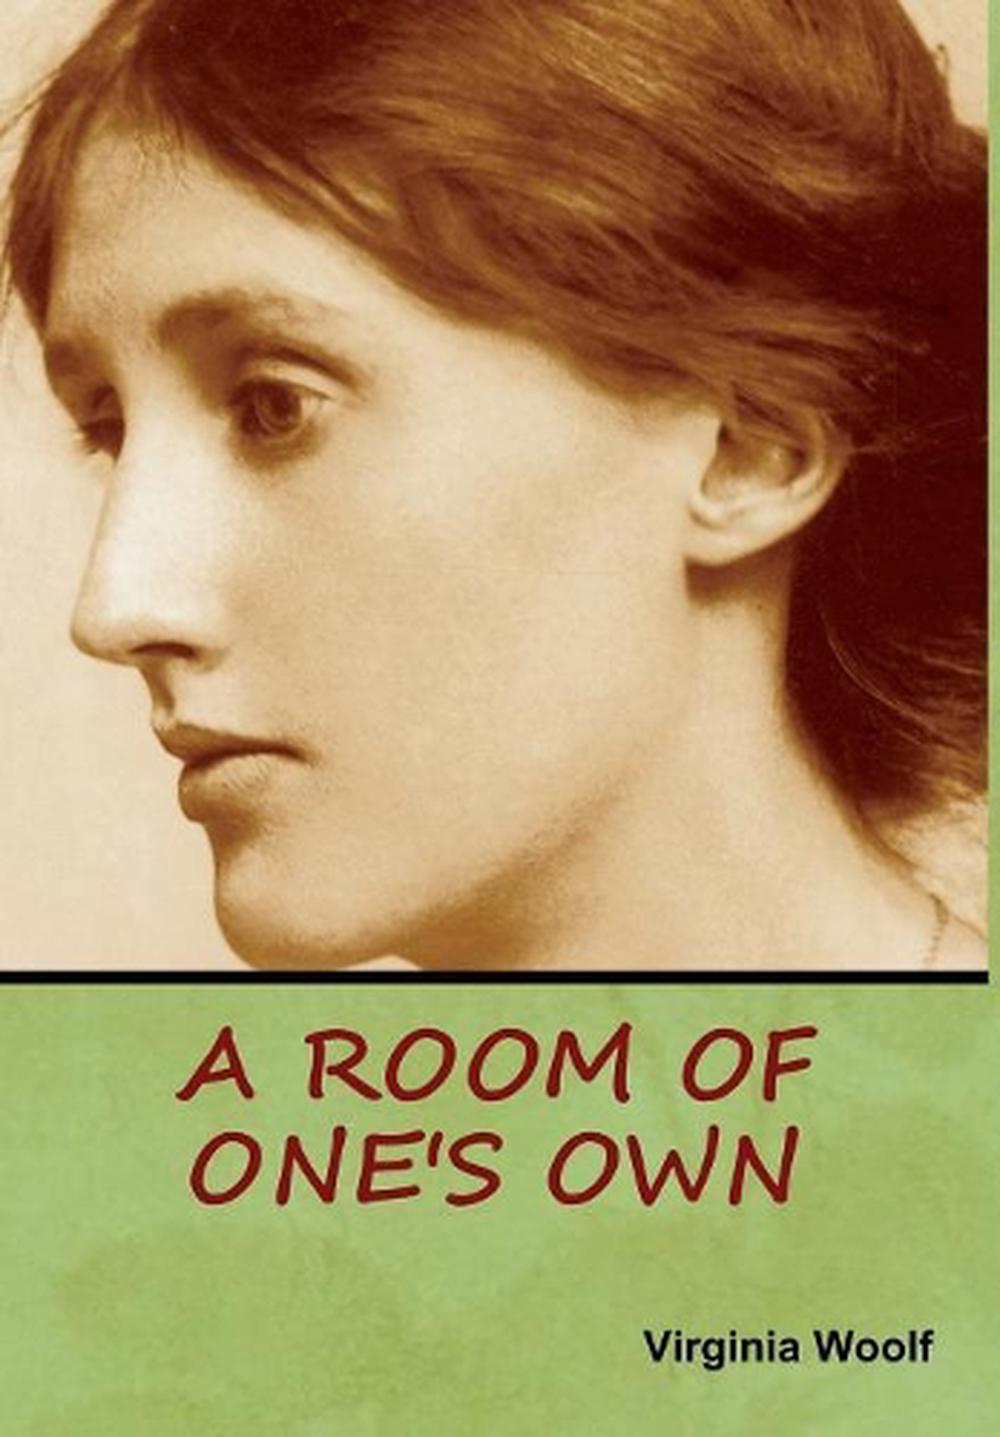 essay a room of one's own by virginia woolf